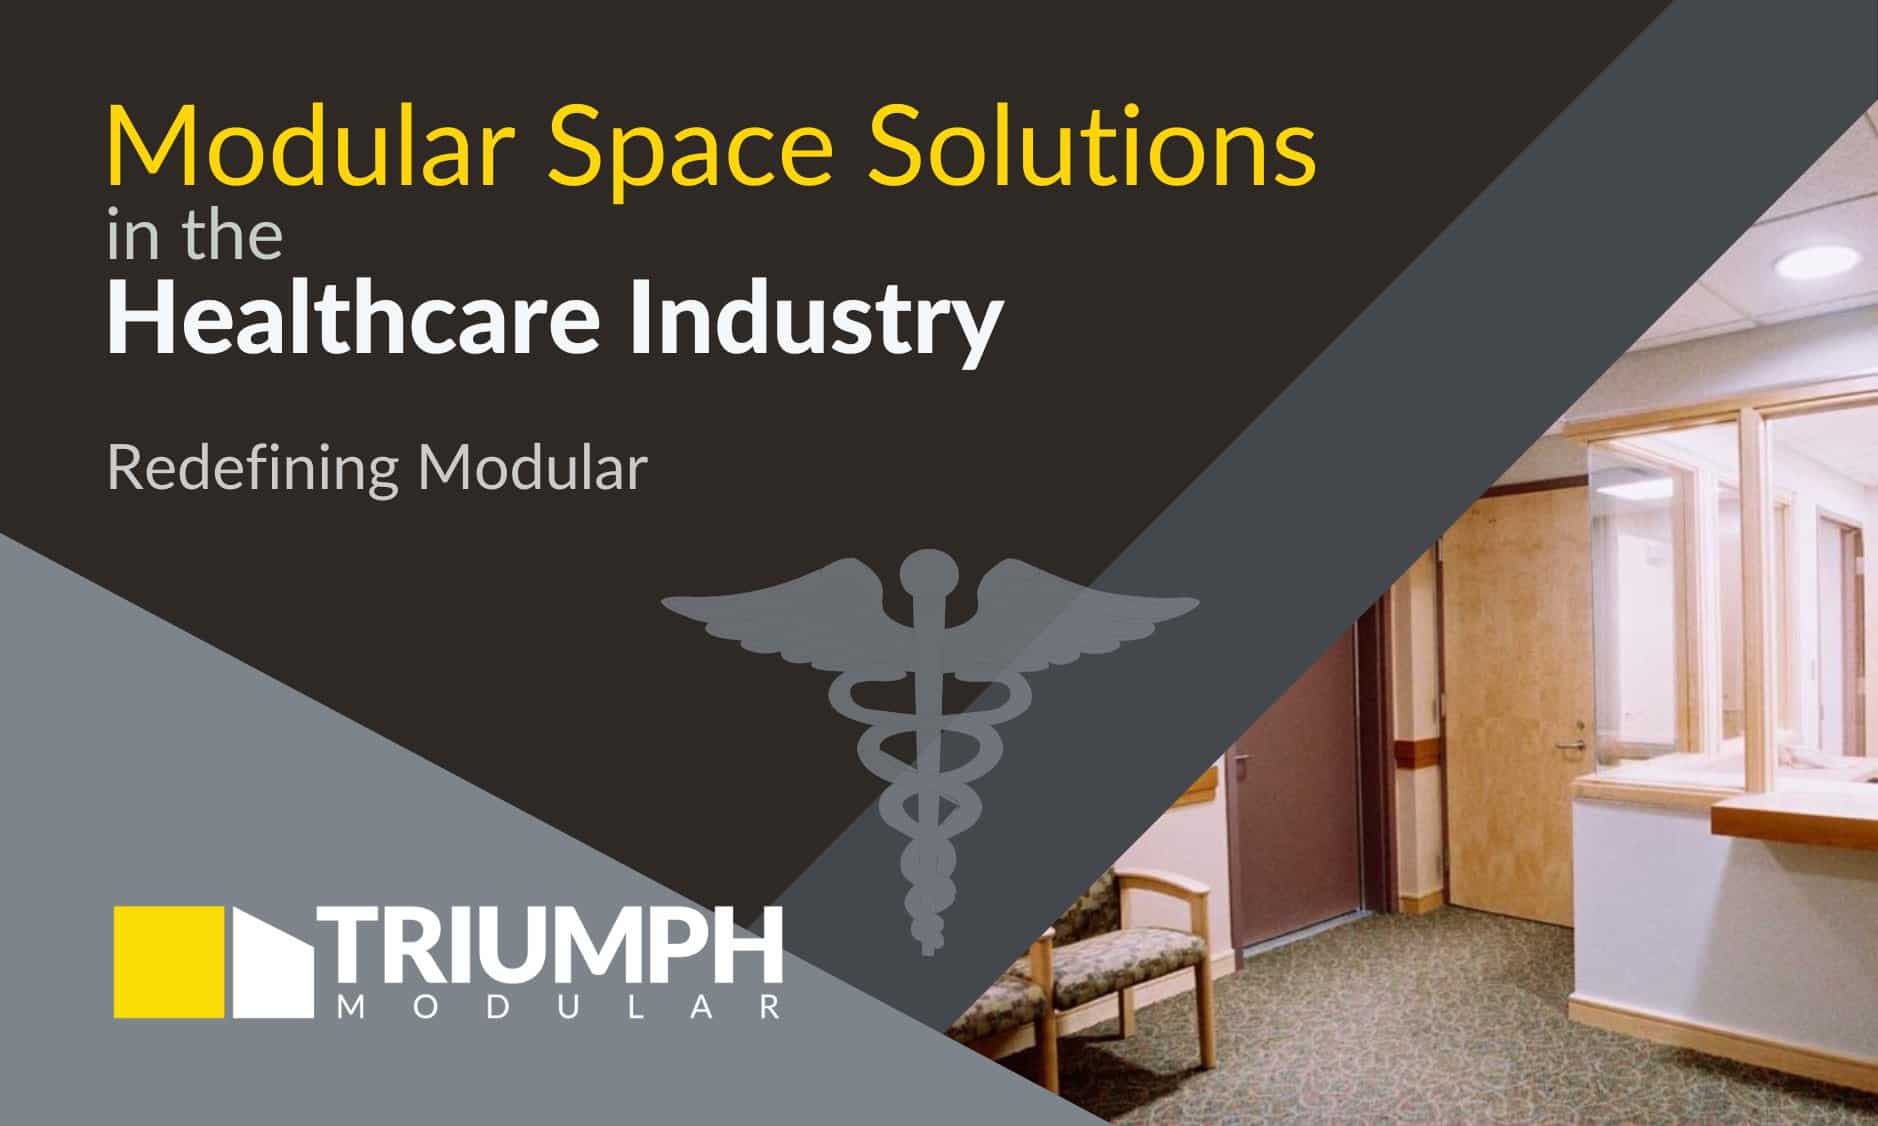 Modular solutions for healthcare featured image